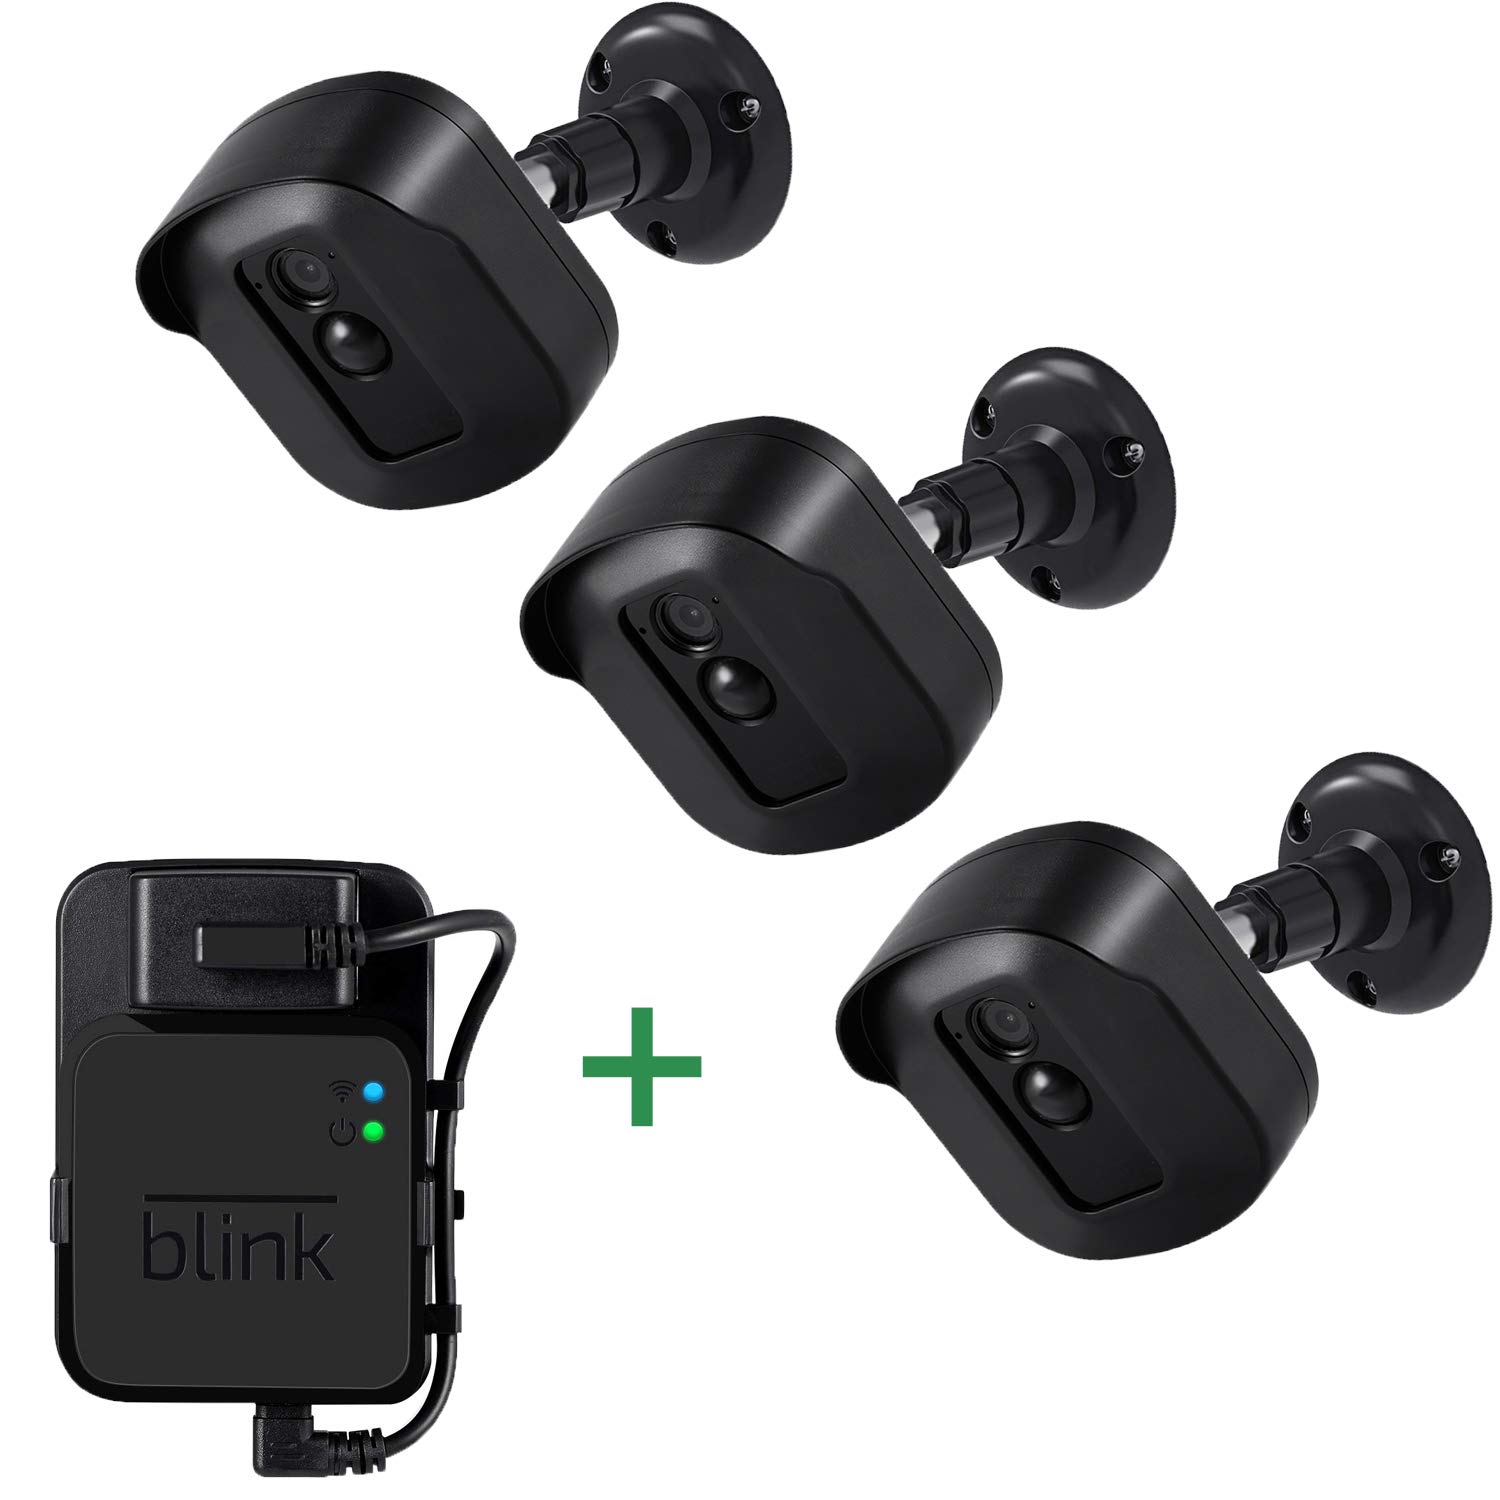 Wall mounts and power outlet for Blink security system